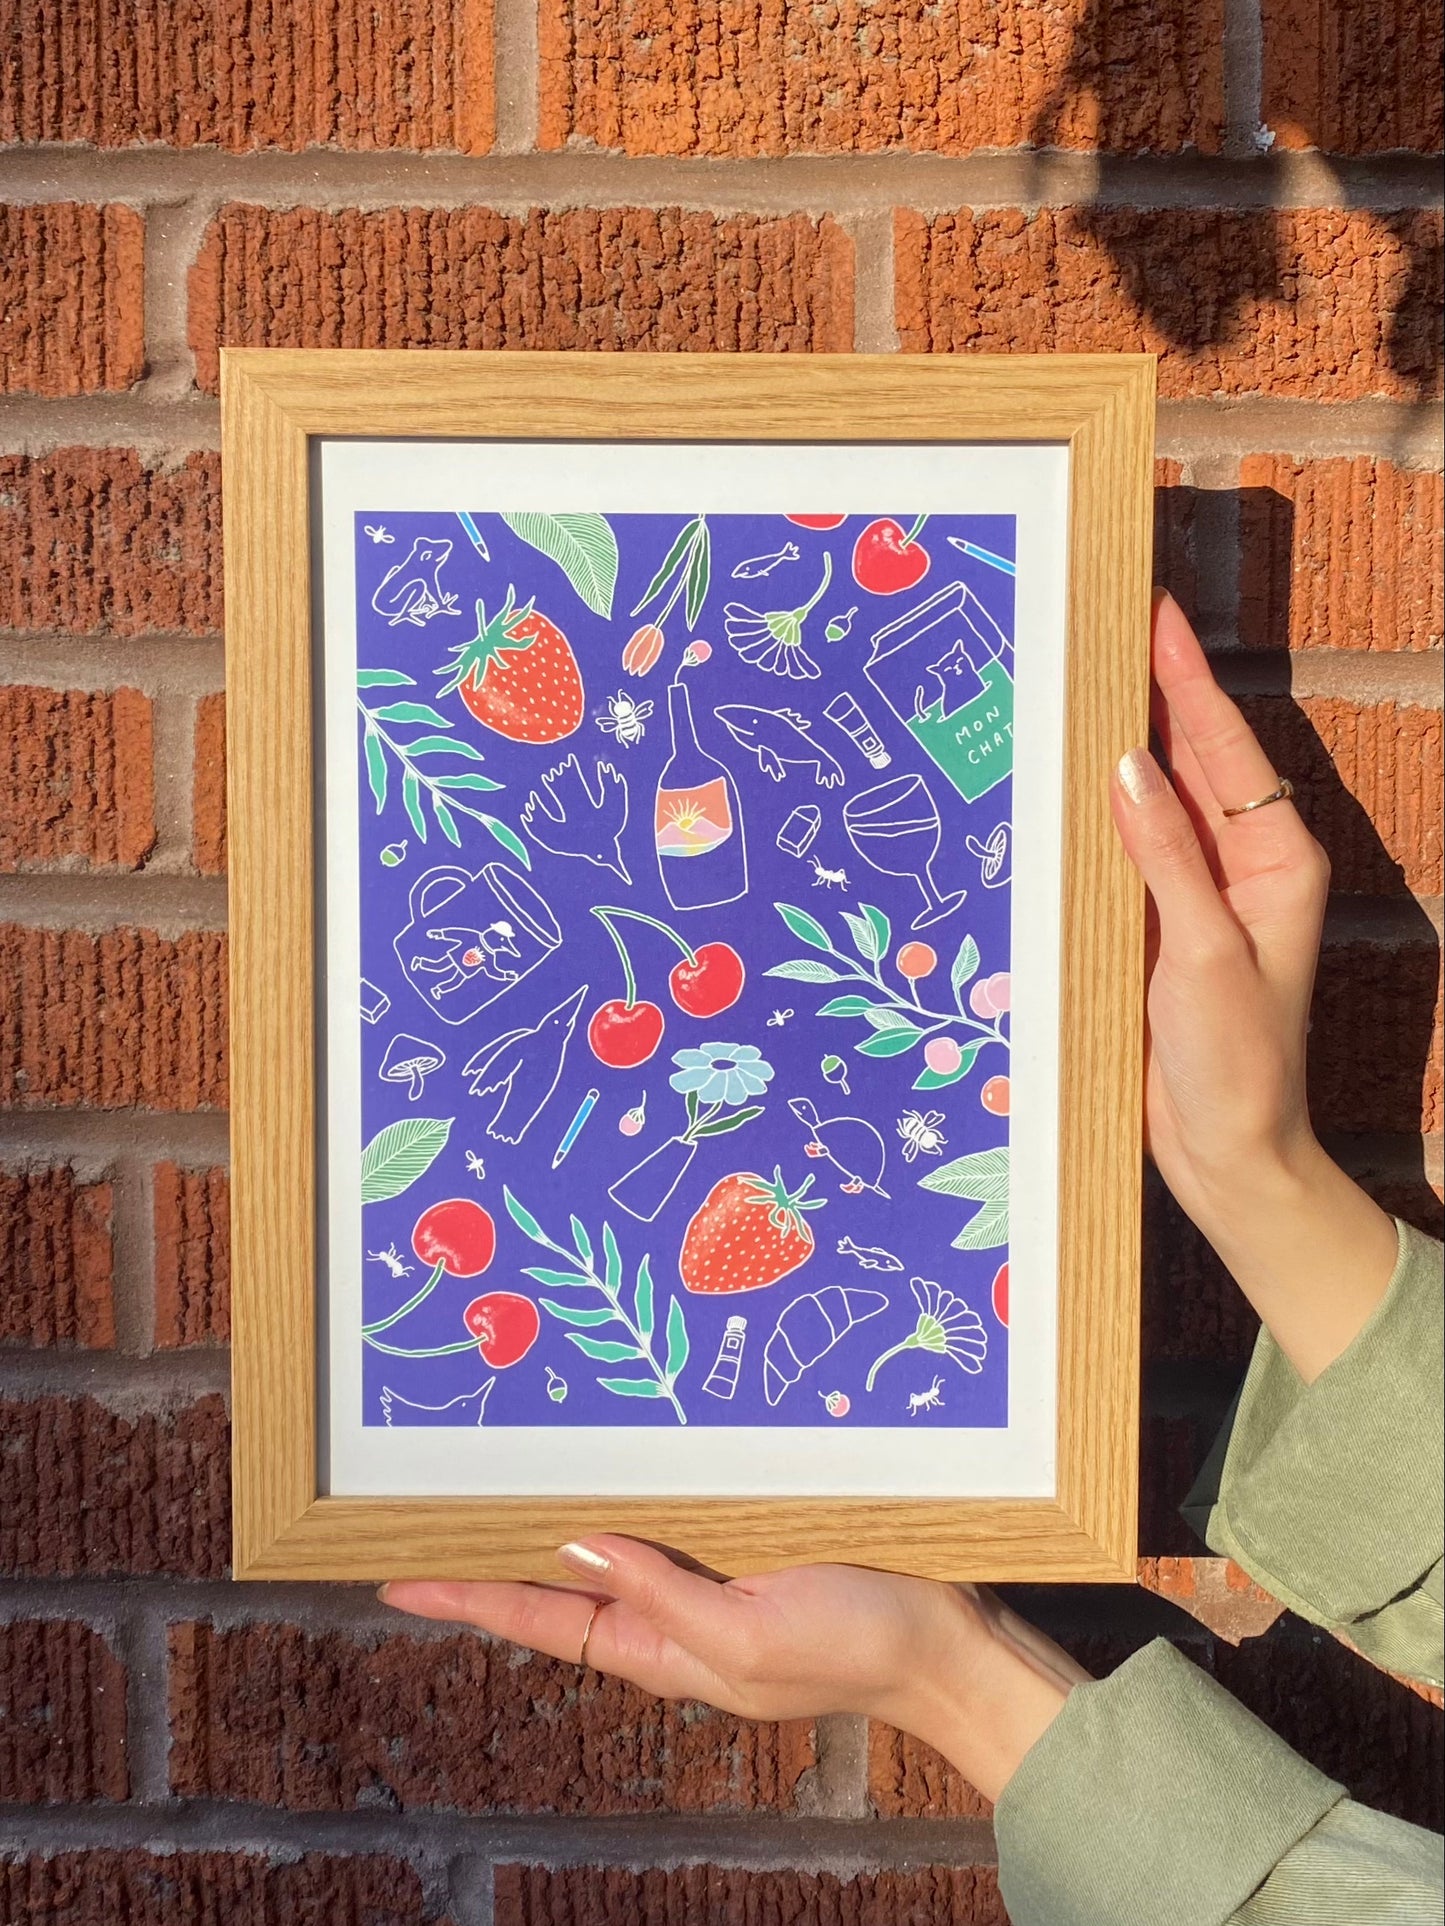 A4 size art print with plants, cherries, strawberries, mugs, stationeries, and variety of everyday goods. 